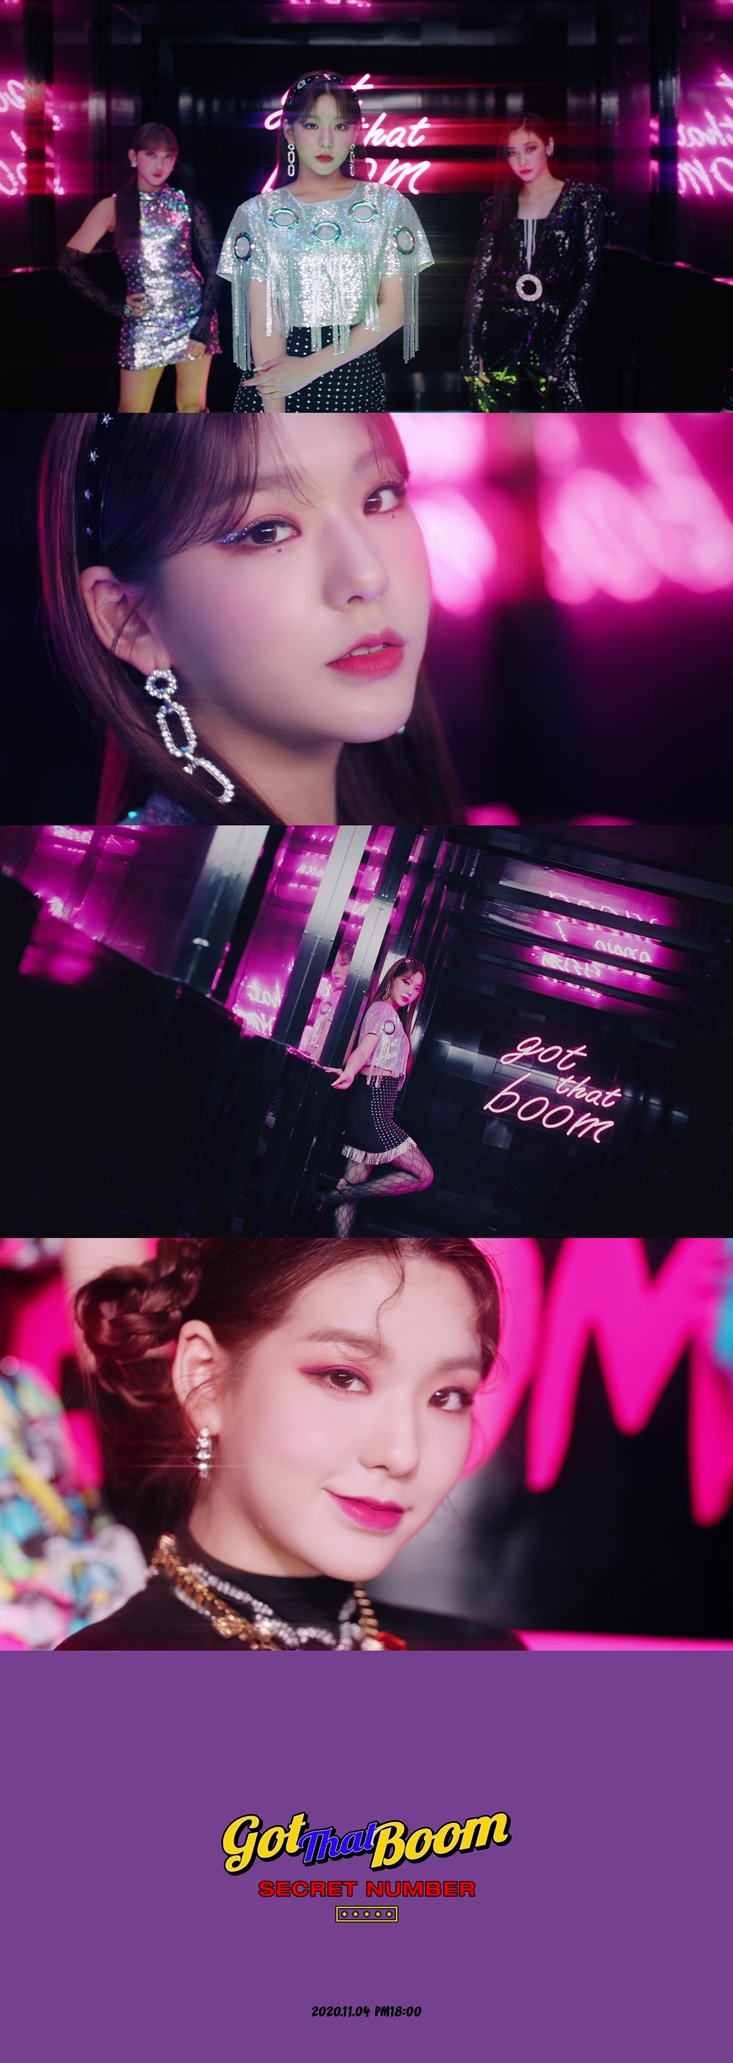 Can bear from The Skilled Rookie of the Year Secret number (SECRET NUMBER) boasted a spectacular visual through comeback Teaser content.Group Secret number agency Vine Entertainment and Aldi Company released Secret number Can bears personal concept photo and teaser video through official SNS at 0:00 on the 28th.It is the third protagonist after Chen Xi and Lea.In the open concept photo, Can bear has perfected colorful makeup and colorful accessories, and has created a colorful charm.In the Teaser video, Can bear showed off her girl crush charm with her imposing gait.Especially, the intense sound in the video stimulates curiosity about the new song Got That Boom.In May, Secret number, which debuted the music industry, gained explosive popularity at the same time as debut with its unremarkable dignity, cool singing ability, and relaxed stage manners.Secret number topped the K-pop charts, and was nominated for the song awards rookie, especially the debut single Who Dis?The music video proved its interest in Secret number, which will continue to grow by exceeding 30 million views.Secret number is a global five-member girl group consisting of Lea, Can bear, Chen Xi, Dita Istrefi and Dennis.Like a password composed of meaningful numbers such as birthdays and anniversaries, it means that you want to be a special person for the public forever.Meanwhile, Secret numbers second single Got That Boom will be released at 6 pm on November 4th.Secret number will raise fans expectations through various Teaser content before the comeback.Photo: Vine Entertainment, Aldi Company